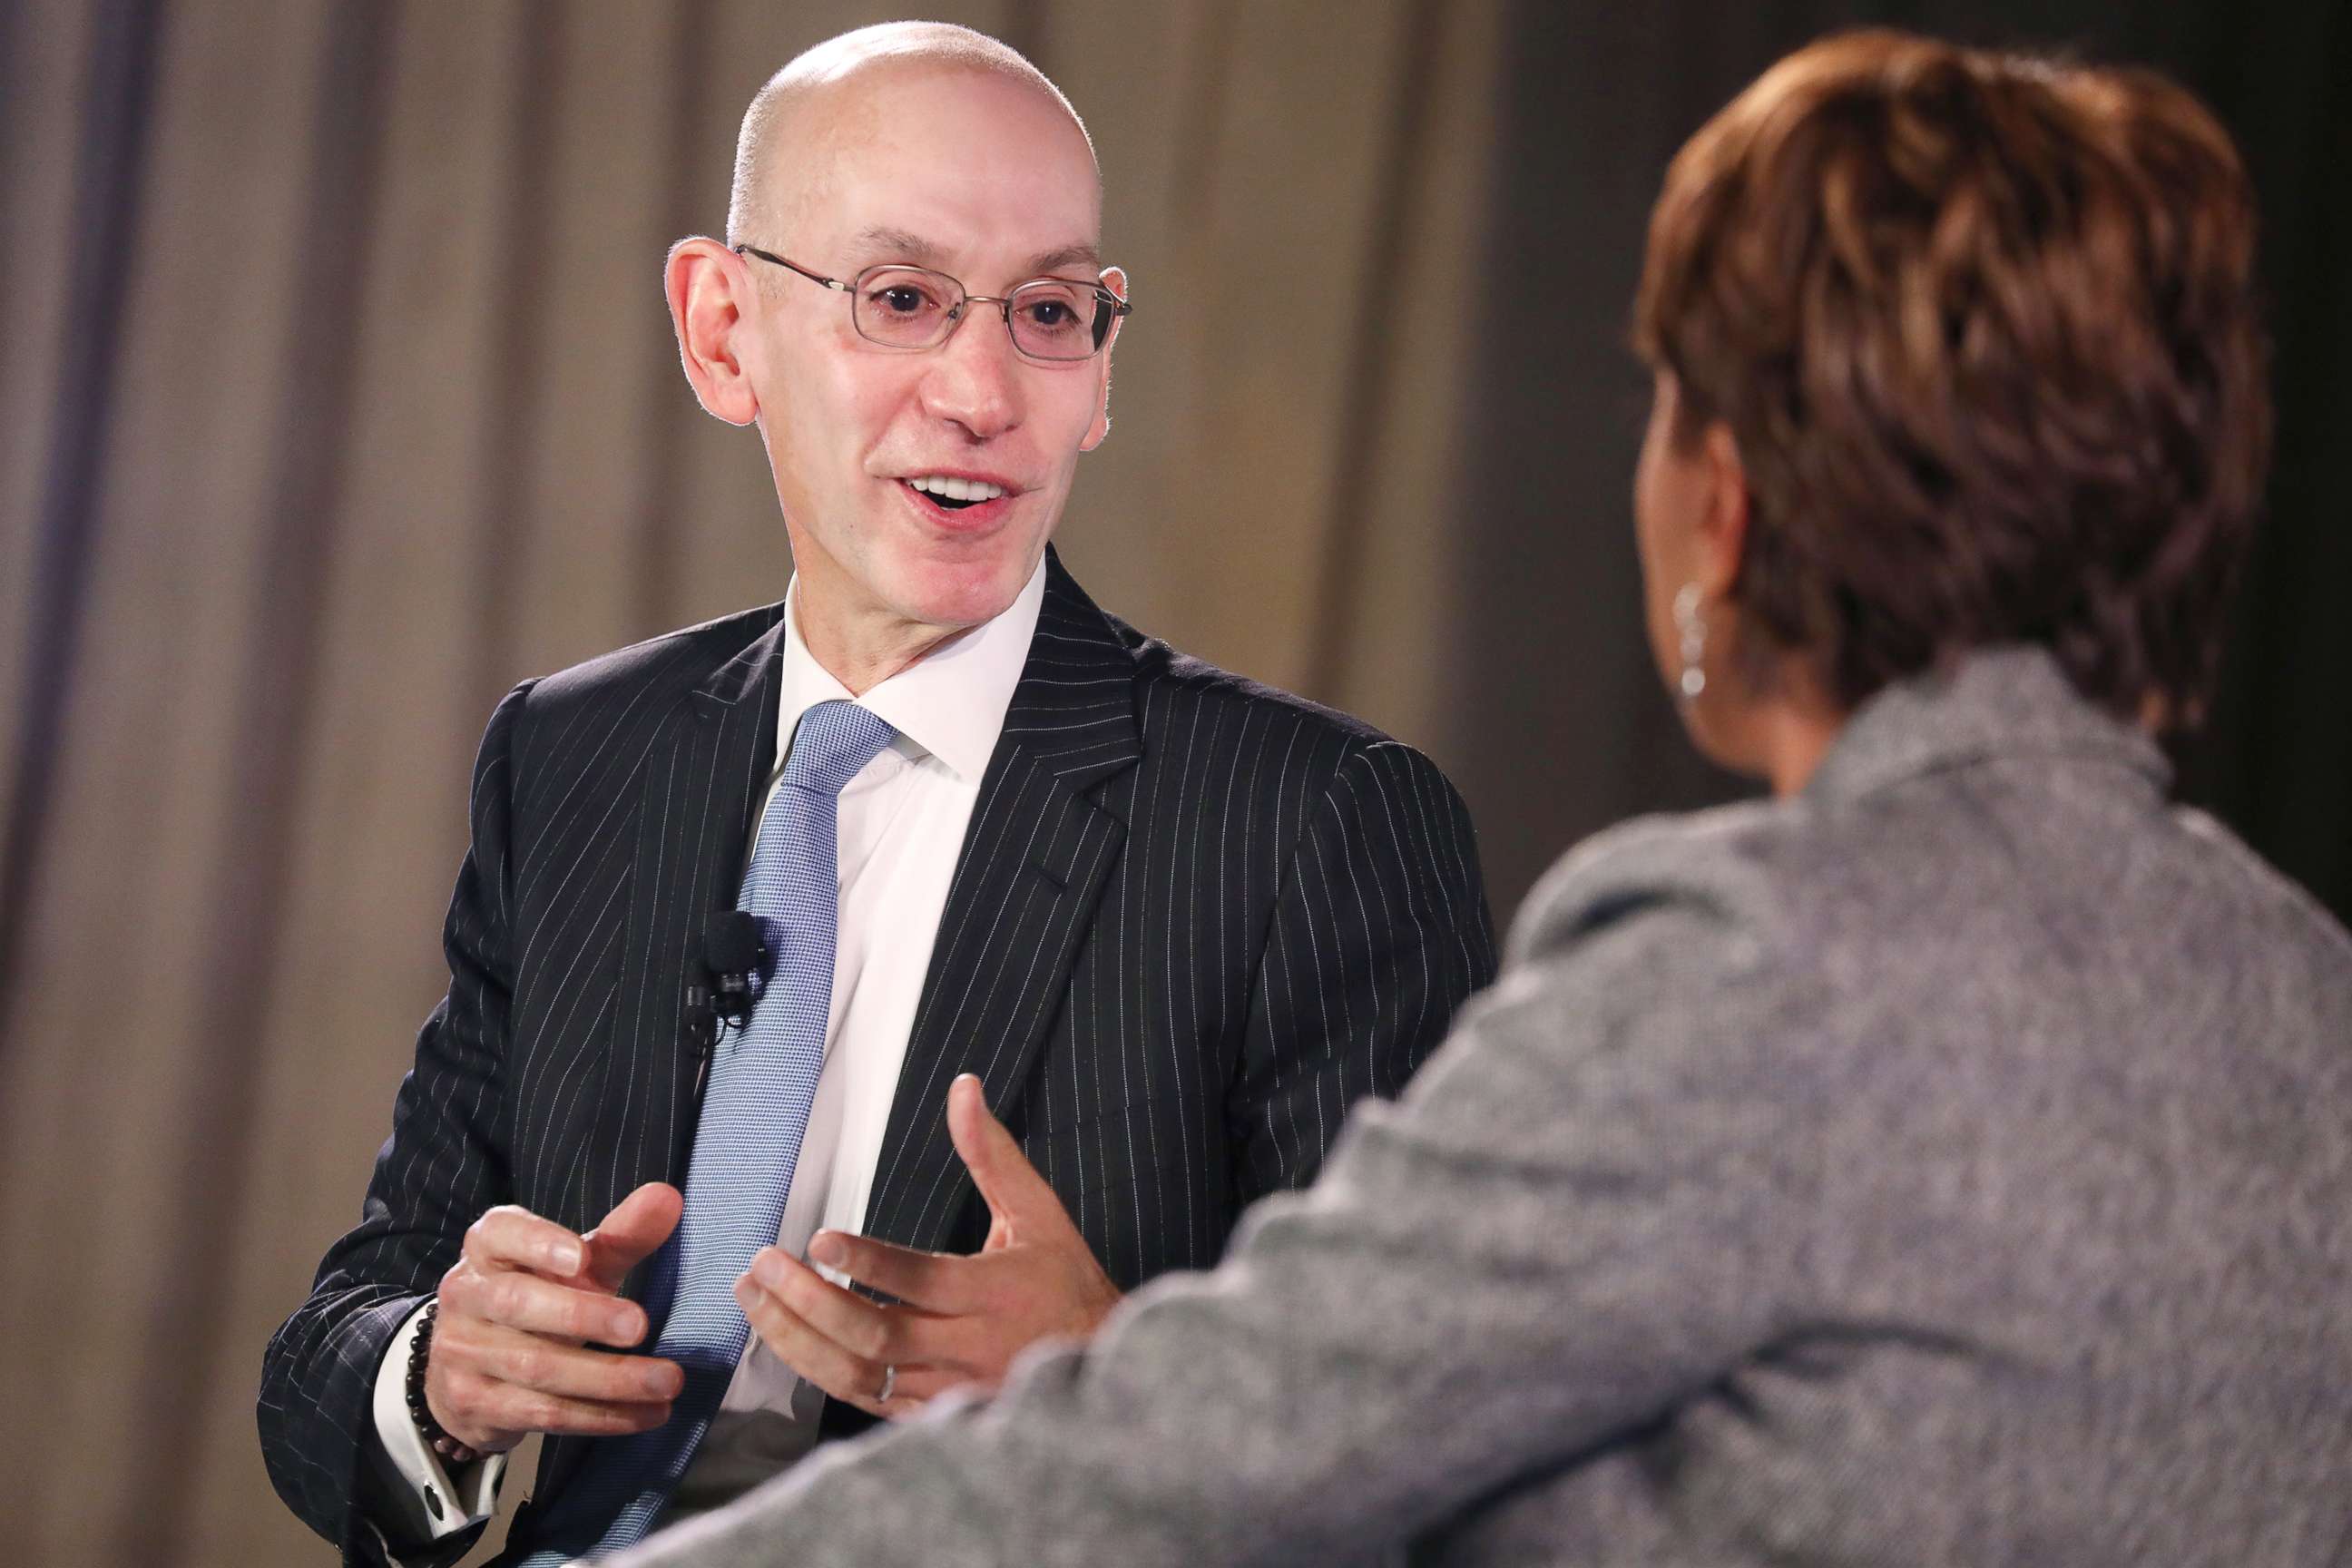 PHOTO: Commissioner of the NBA, Adam Silver and Robin Roberts speak onstage during the TIME 100 Health Summit at Pier 17, Oct. 17, 2019 in New York City.